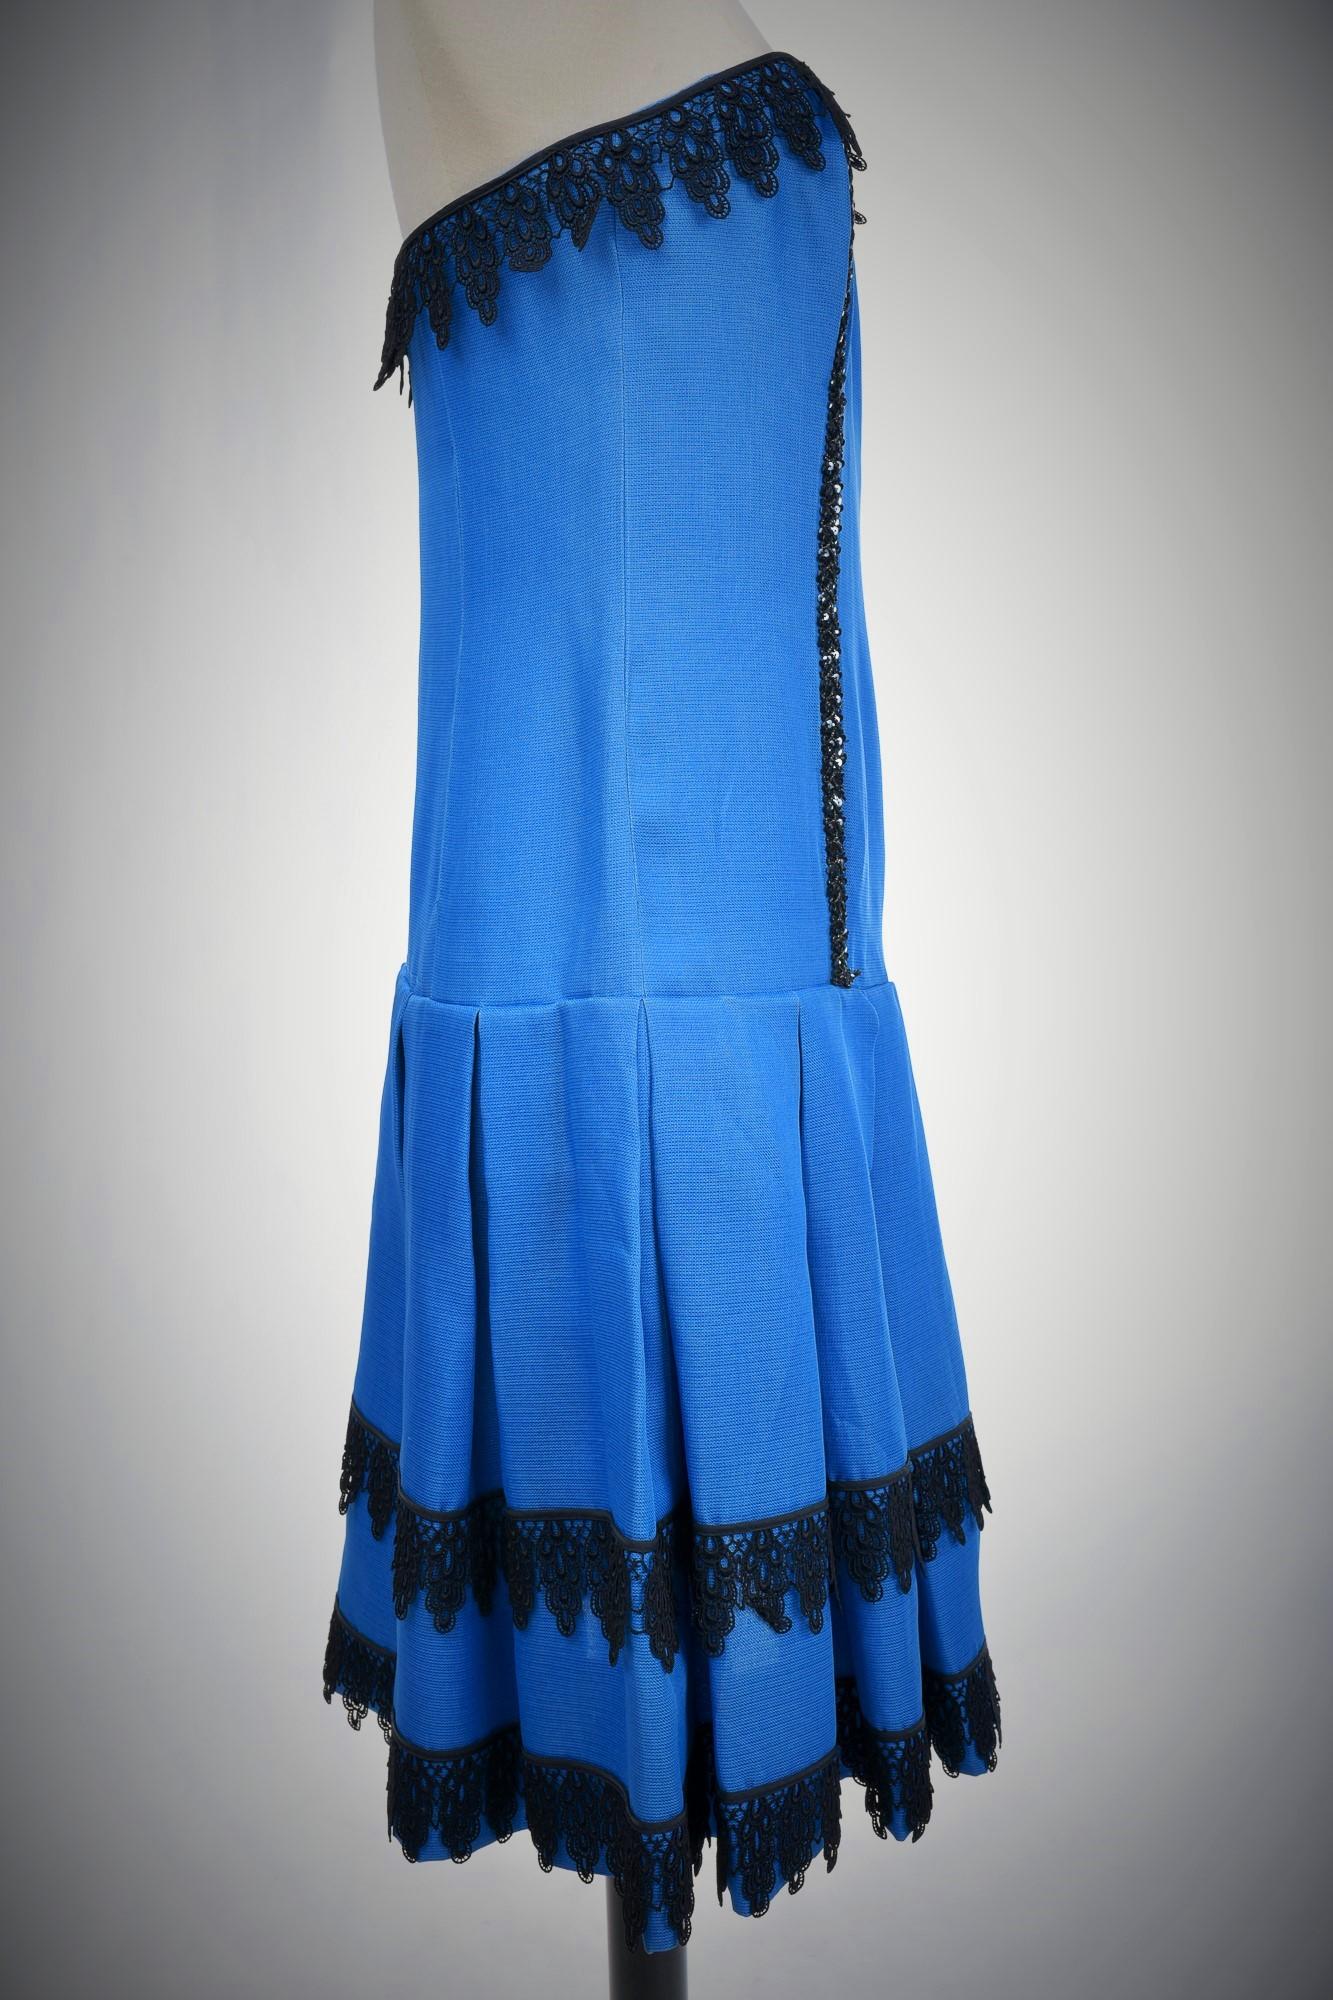 Hubert de Givenchy Cocktail Dress in Gazar Silk and Lace Circa 1968/1970 For Sale 7